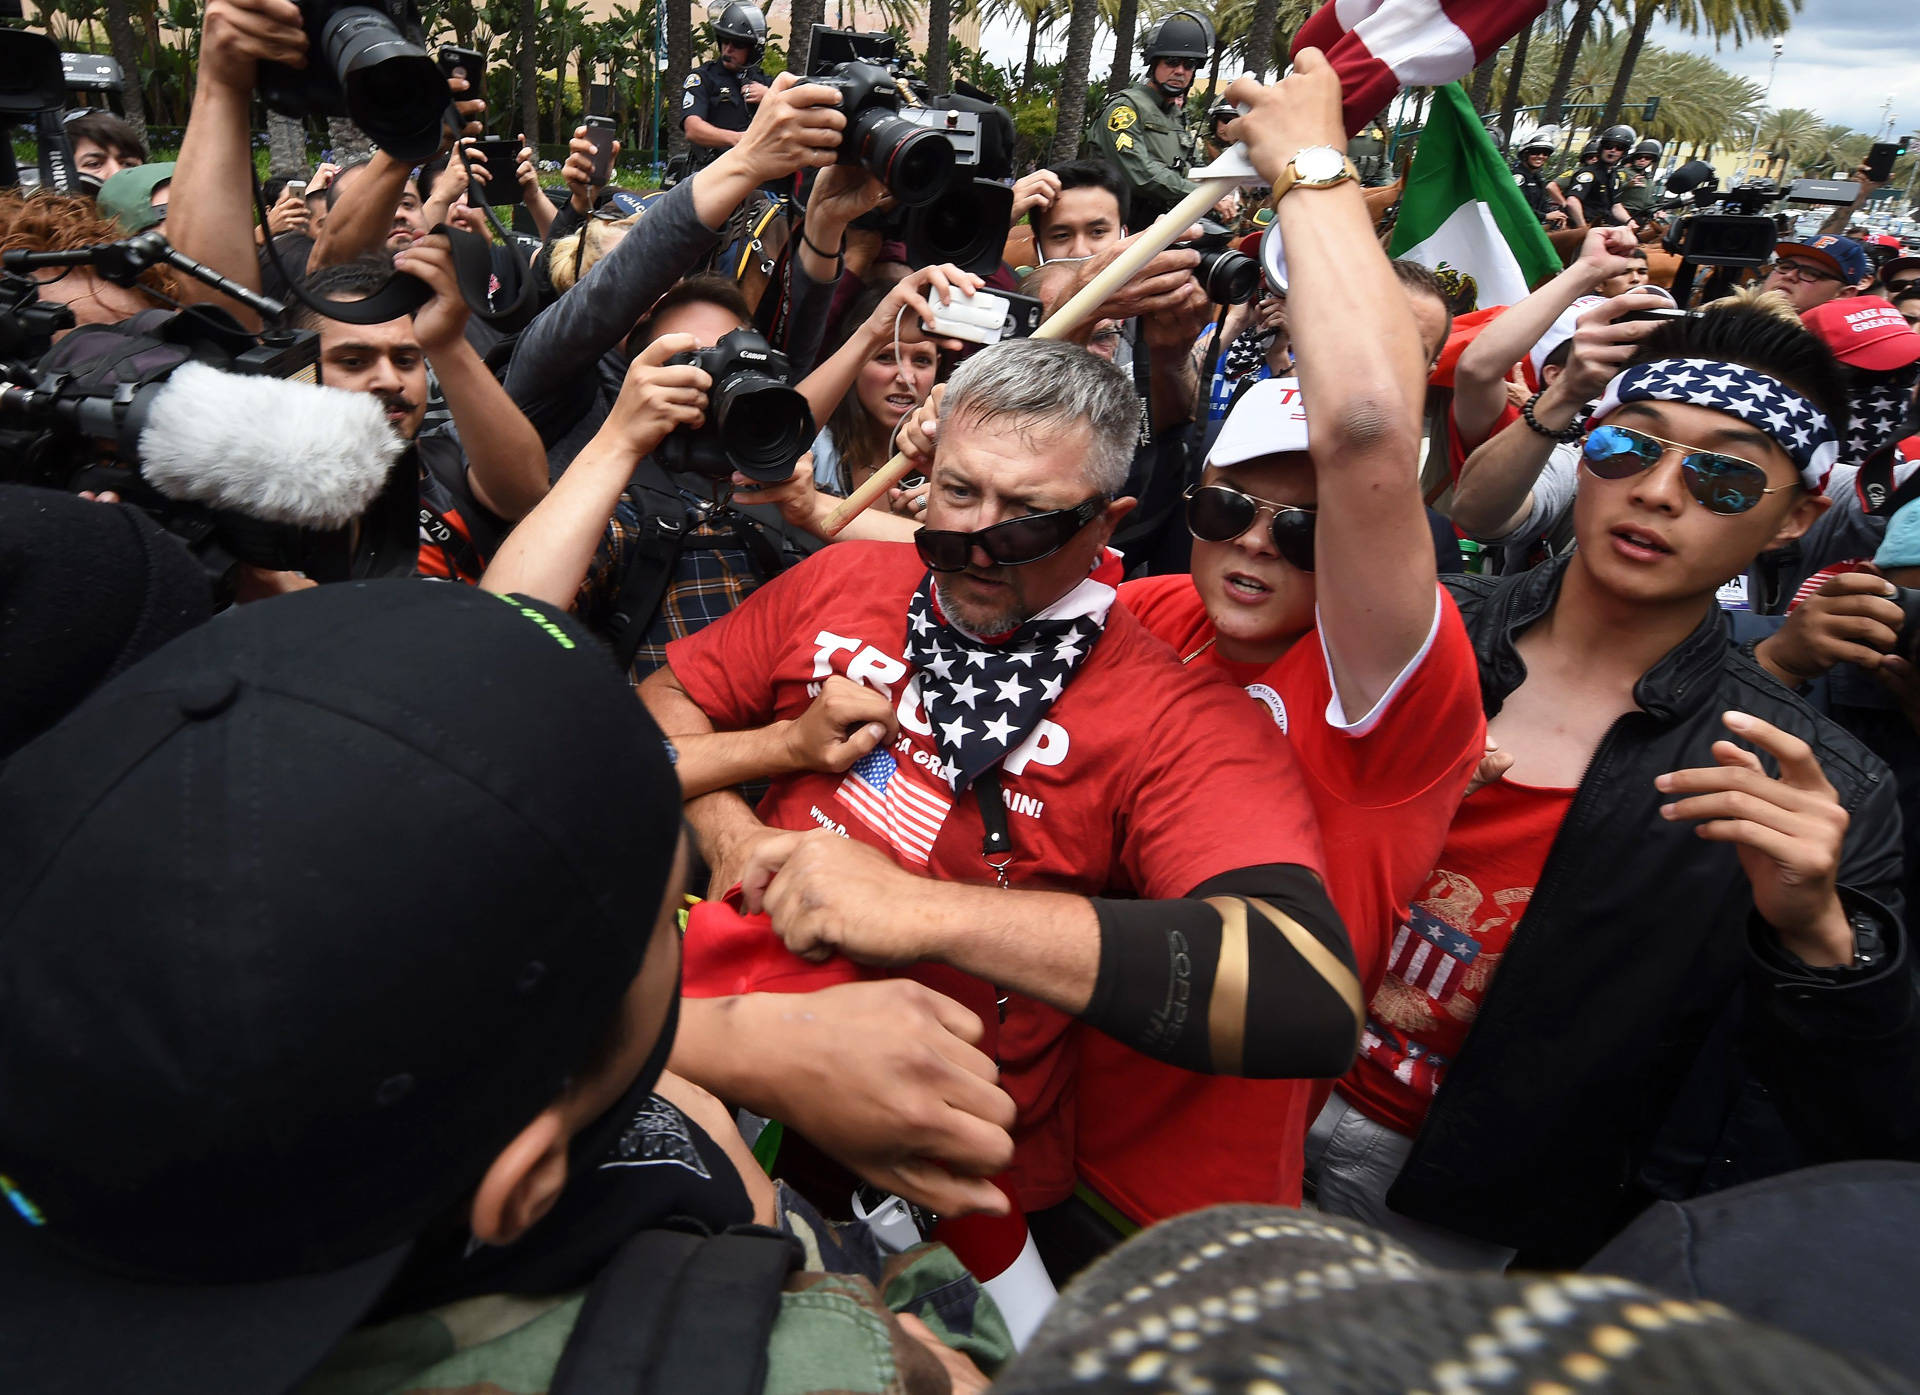 Anti-Trump protesters (L) clash with Donald Trump supporters (C) outside the Anaheim Convention Center on May 25, 2016. Mark Ralston/AFP/Getty Images